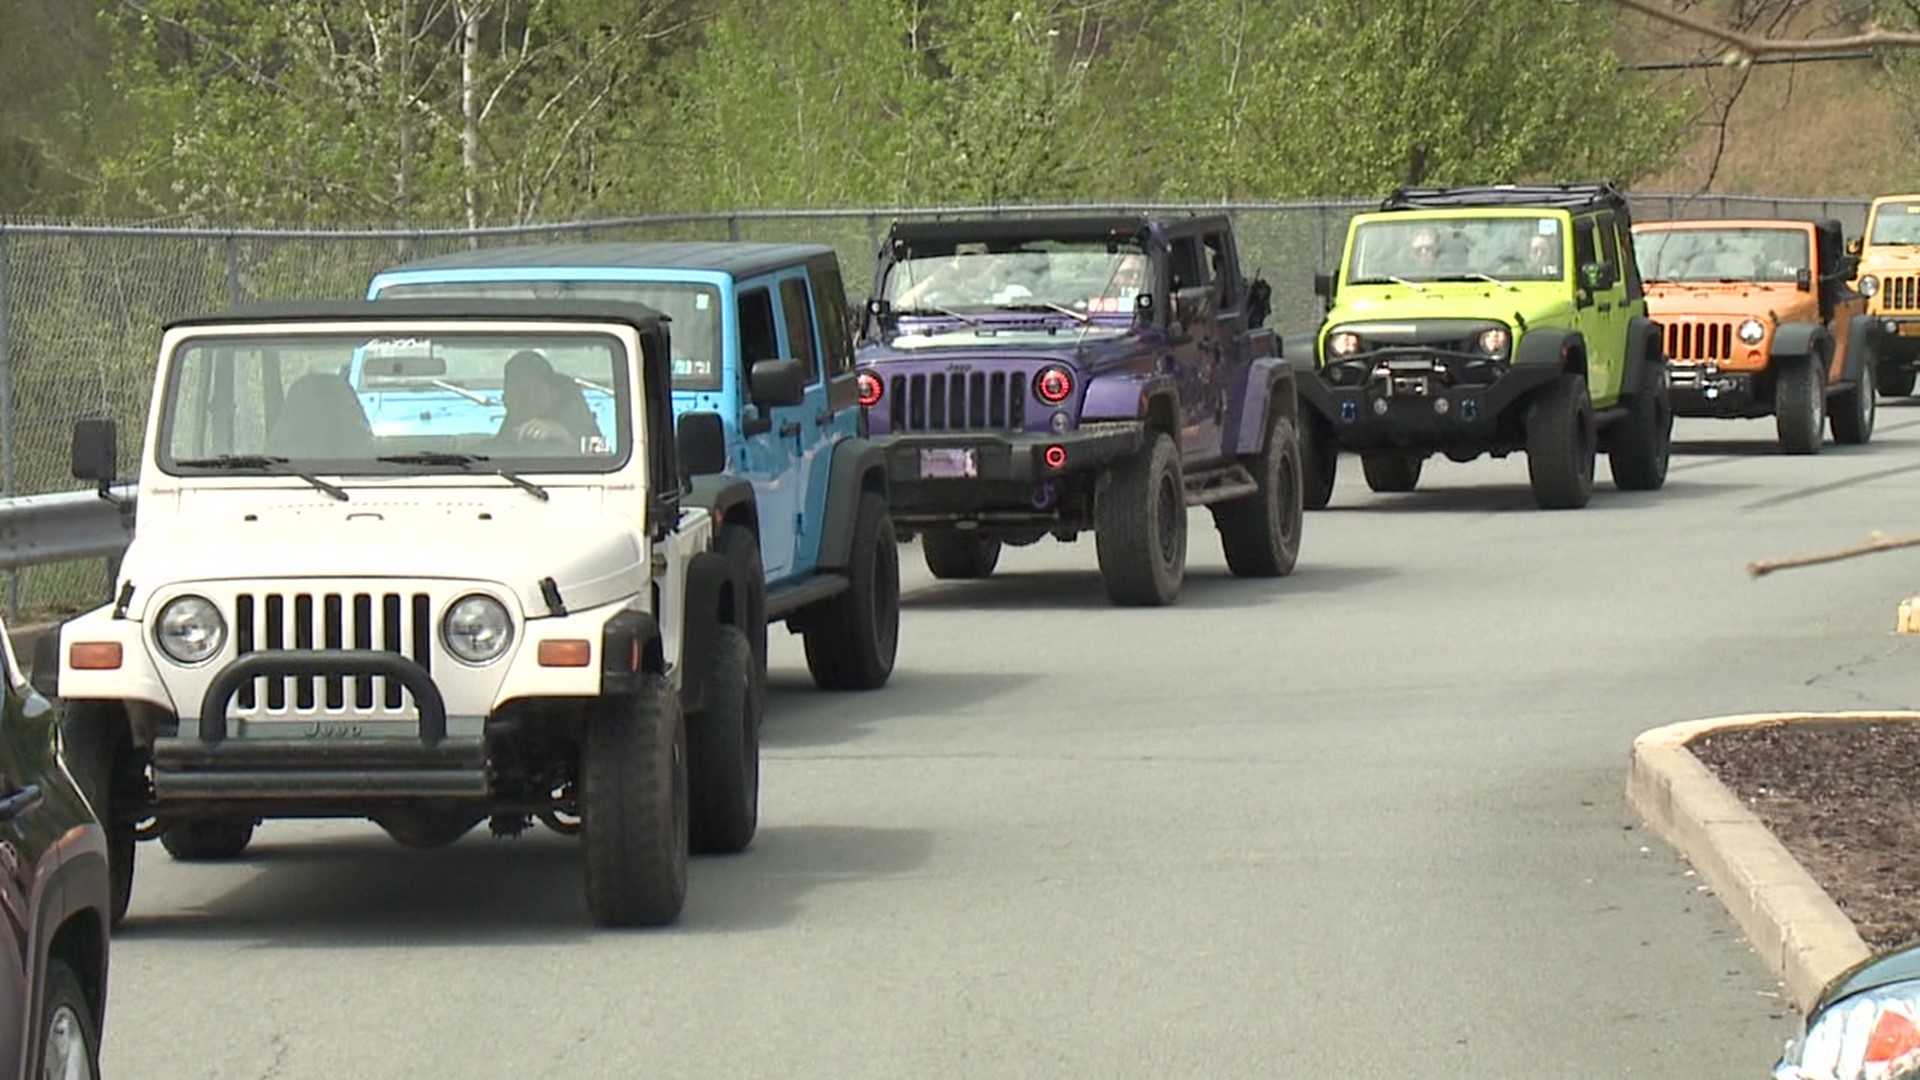 More than 40 Jeeps took part in an off-road tour of Wayne County.